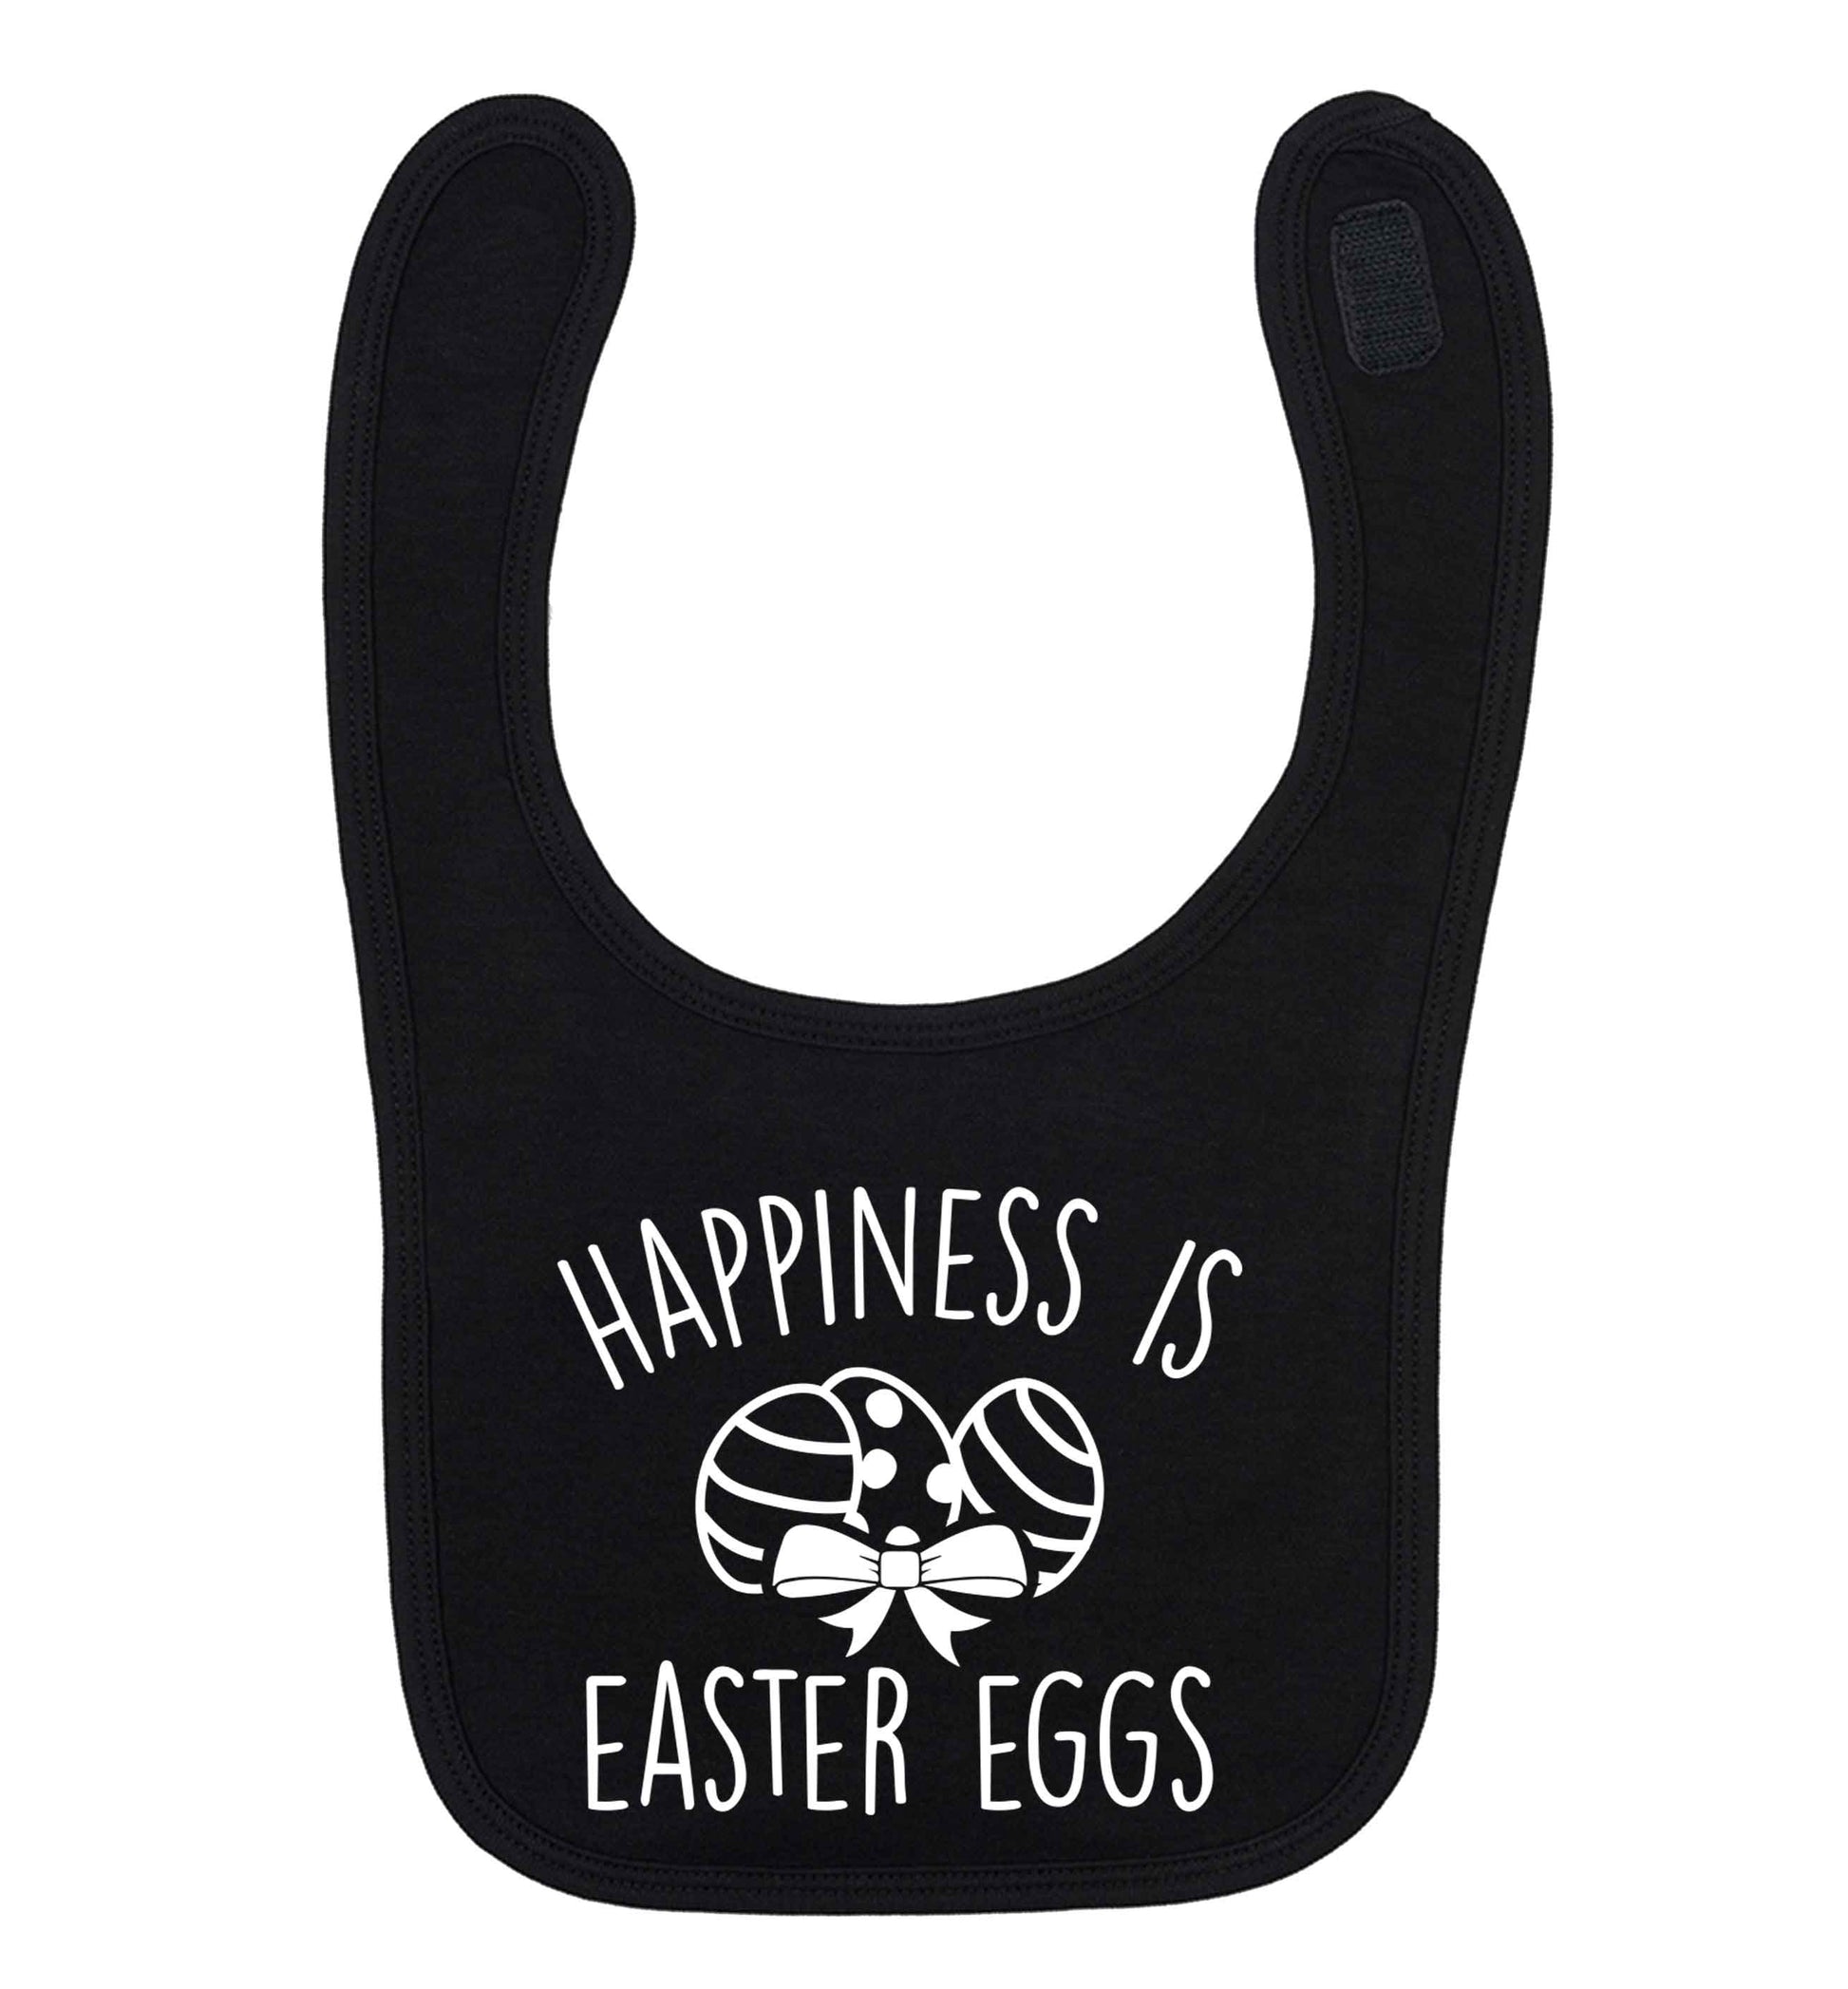 Happiness is Easter eggs black baby bib